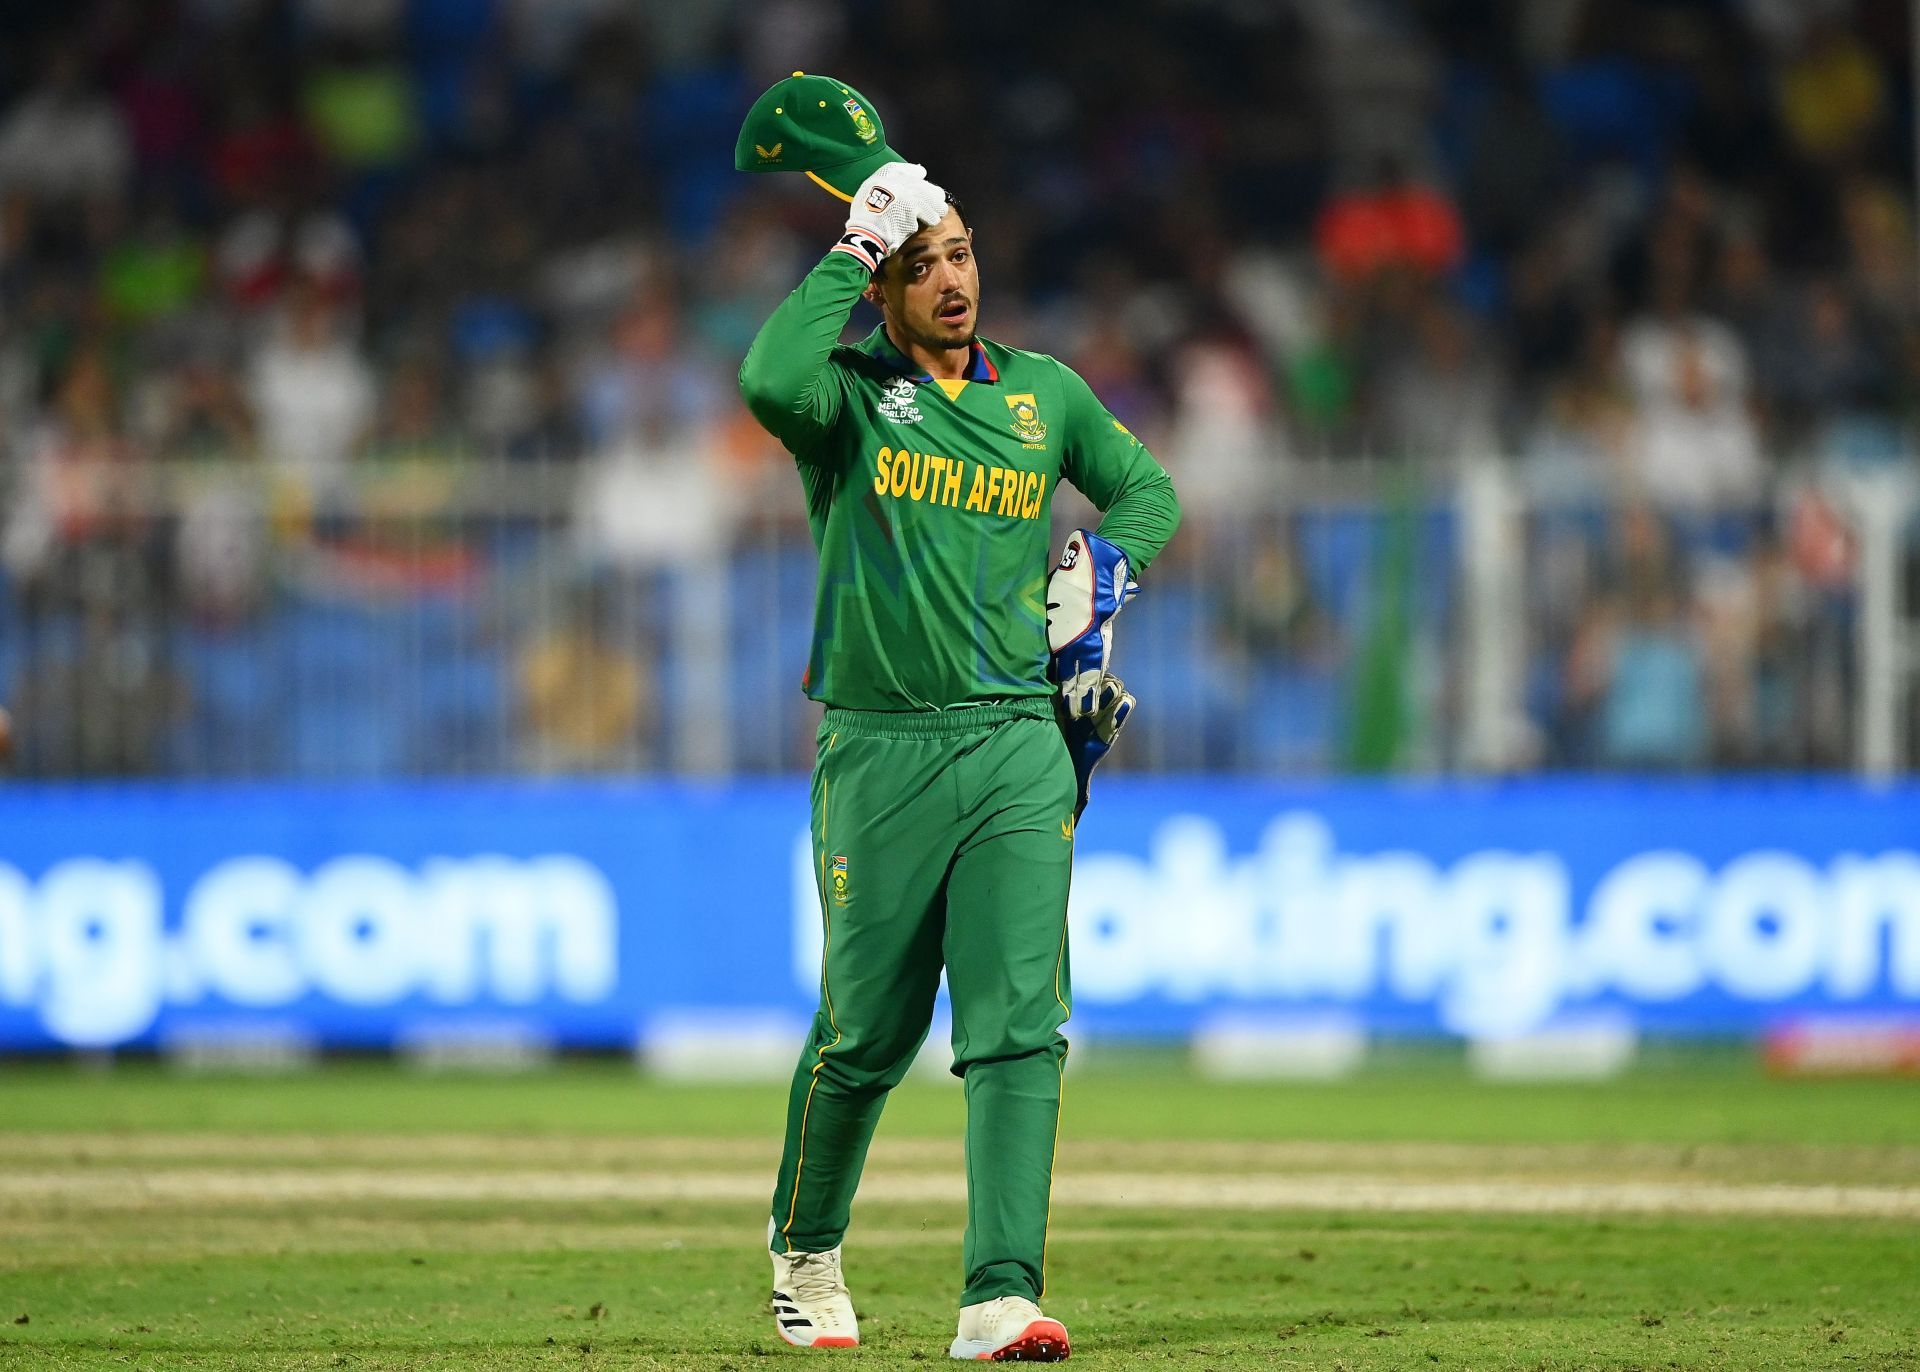 Quinton de Kock played for the Royal Challengers Bangalore in 2018